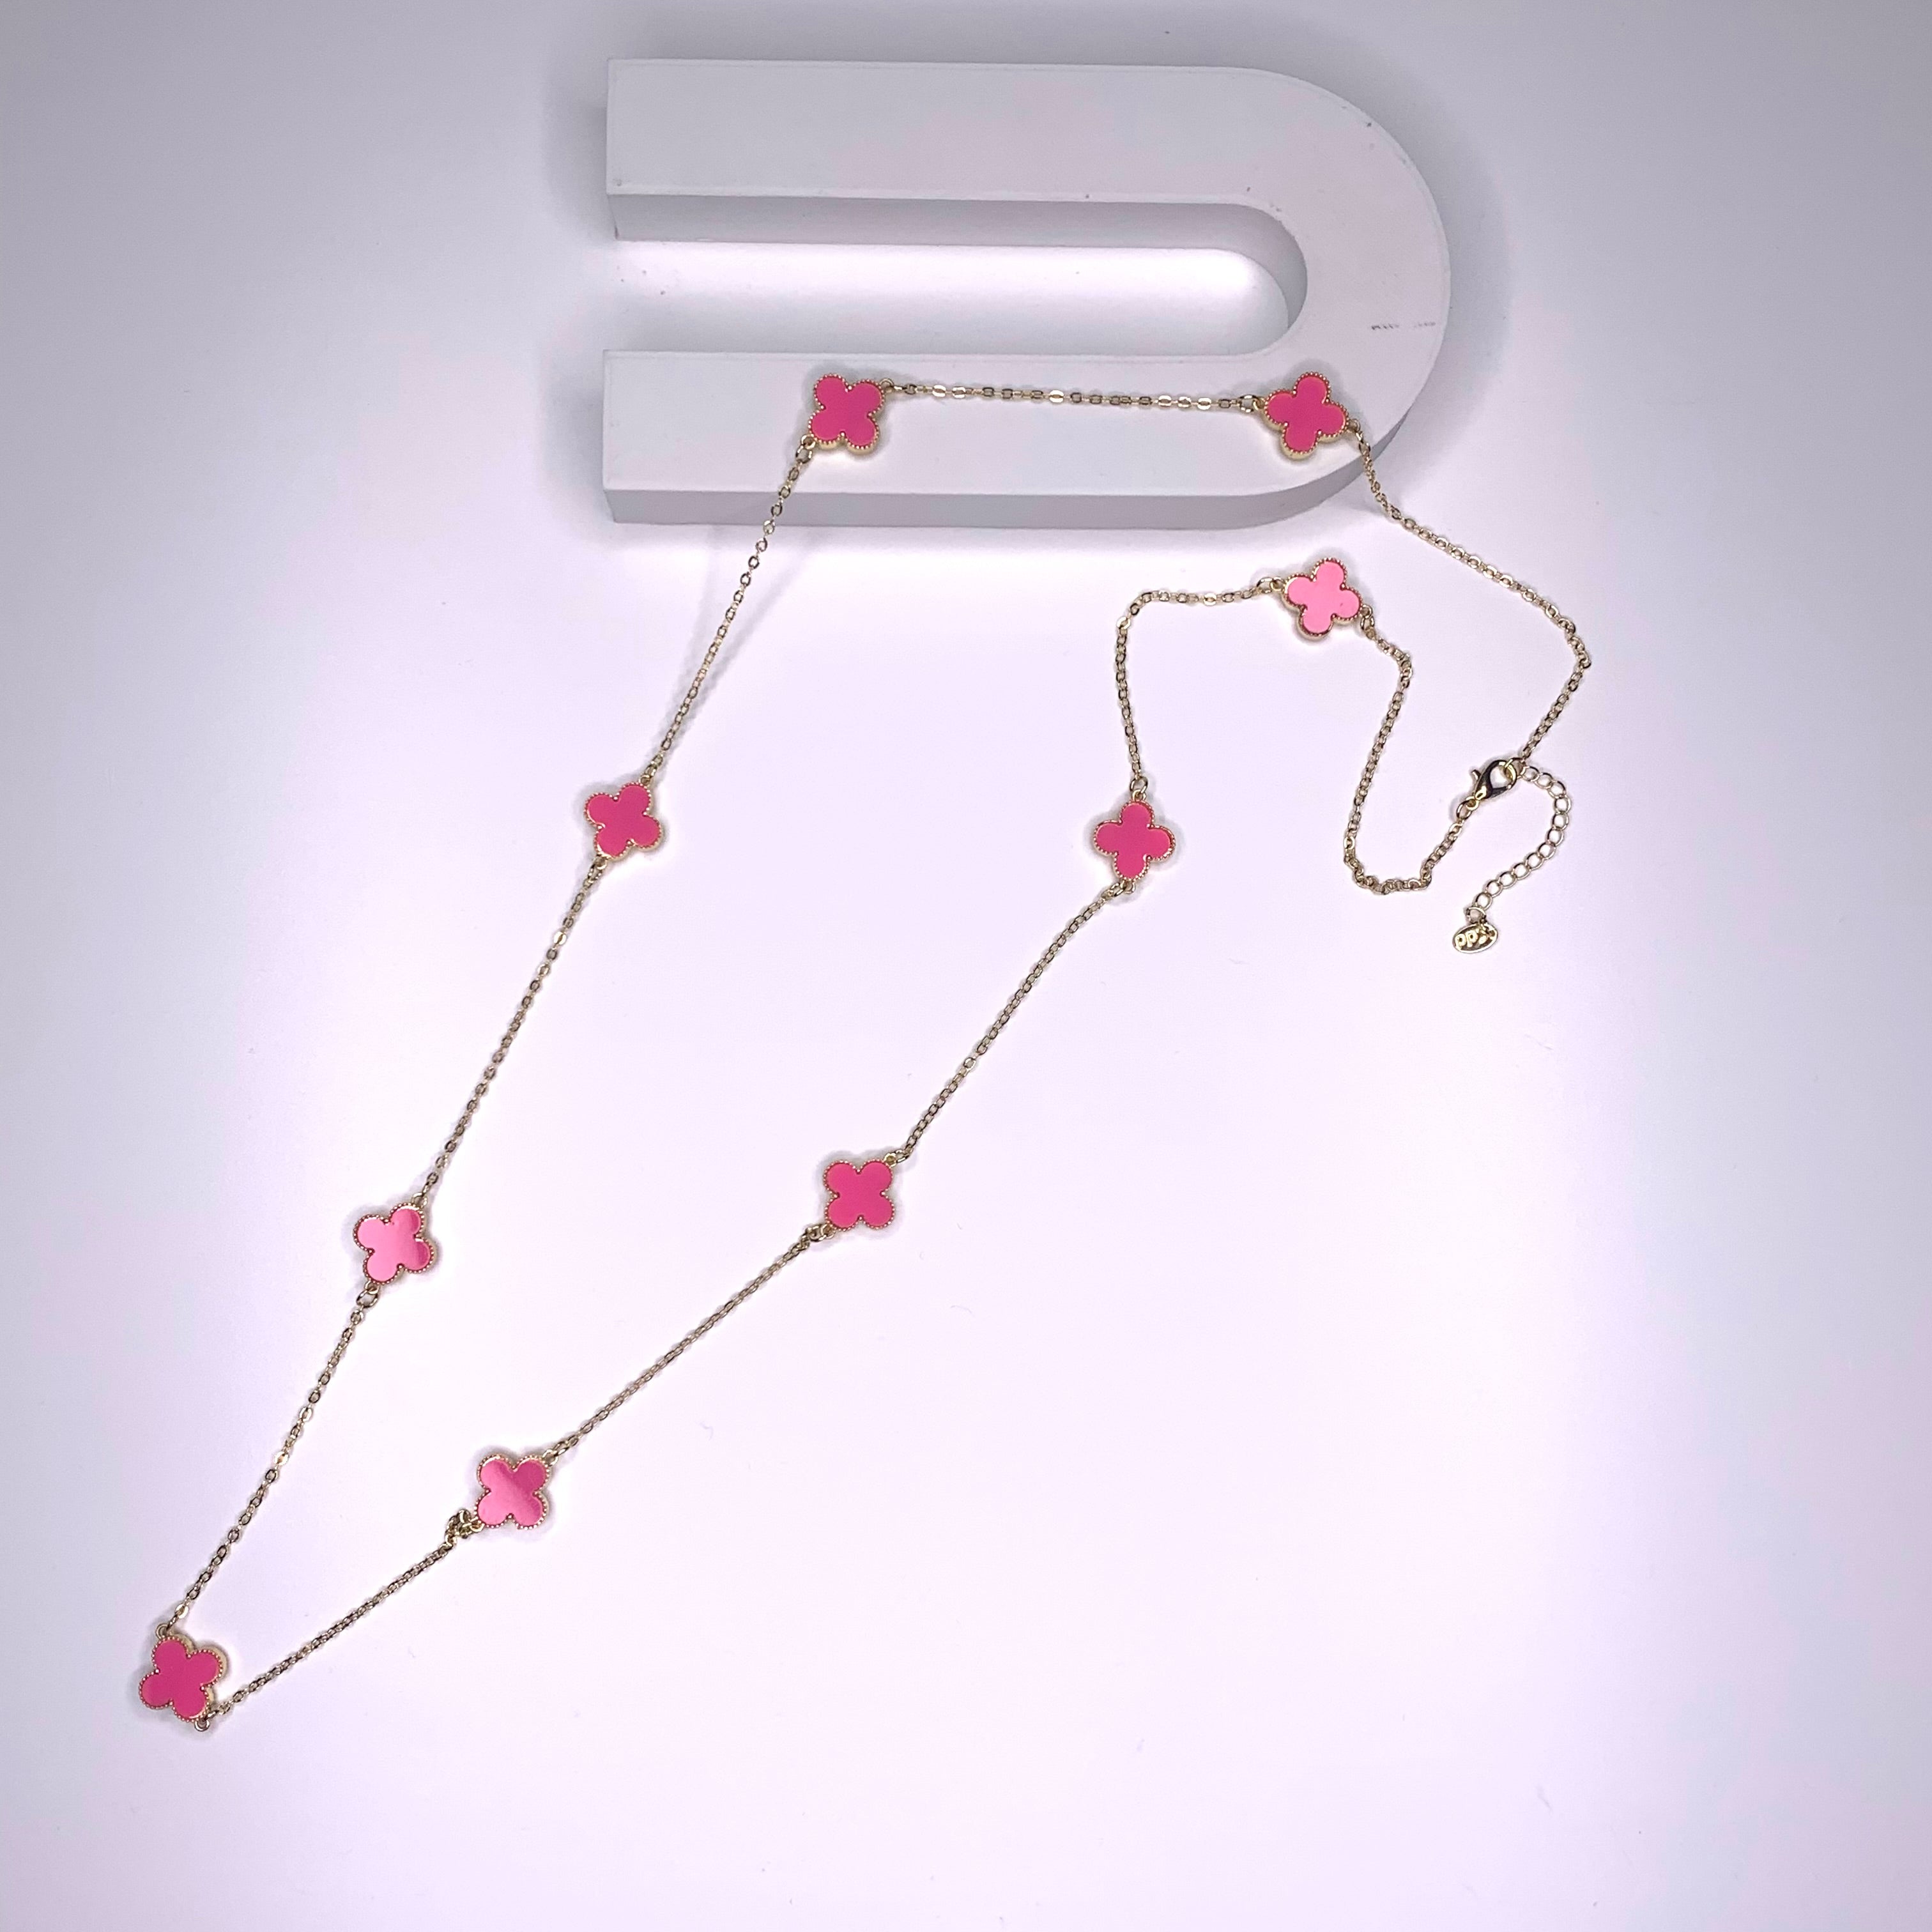 Long necklace with hot pink four-leaf clover stations on a gold paper chain